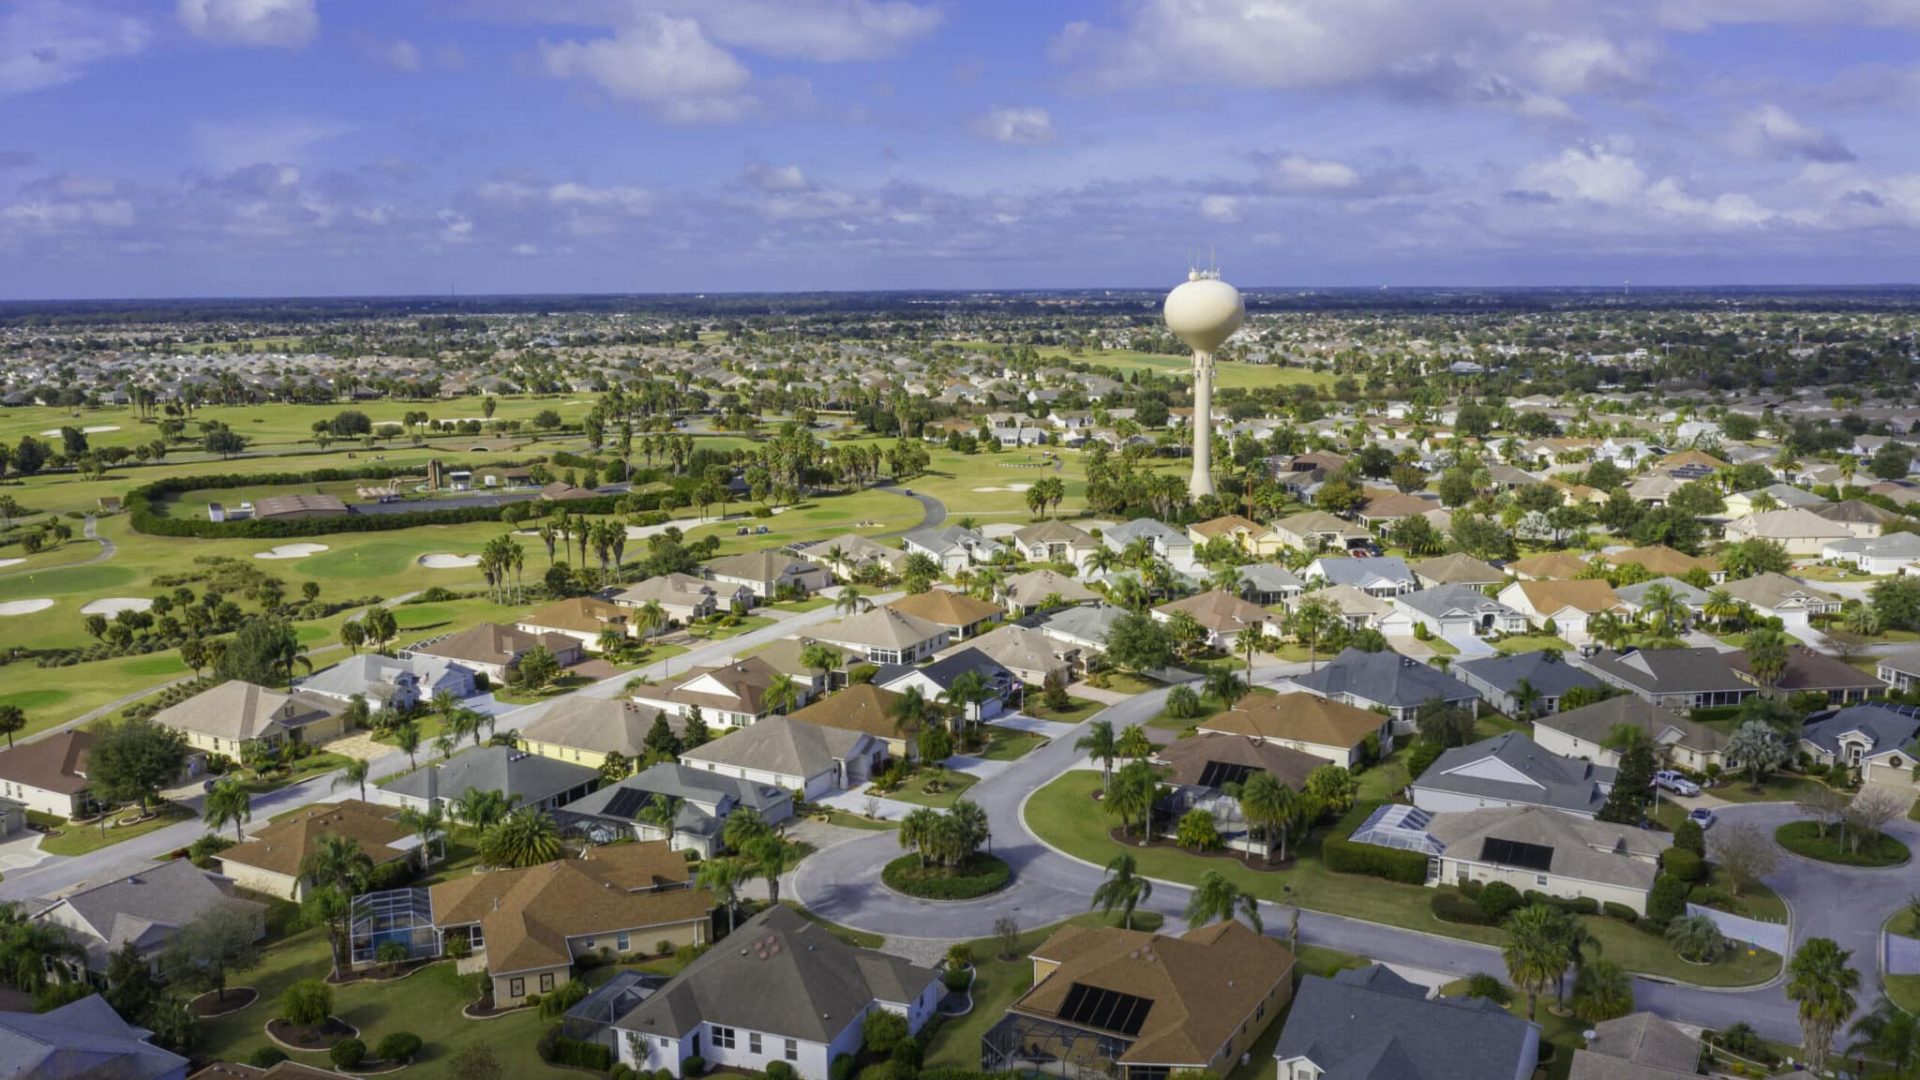 Drone view of residential neighborhood and golf course located in The Villages, a retirement and golfing community in Florida.